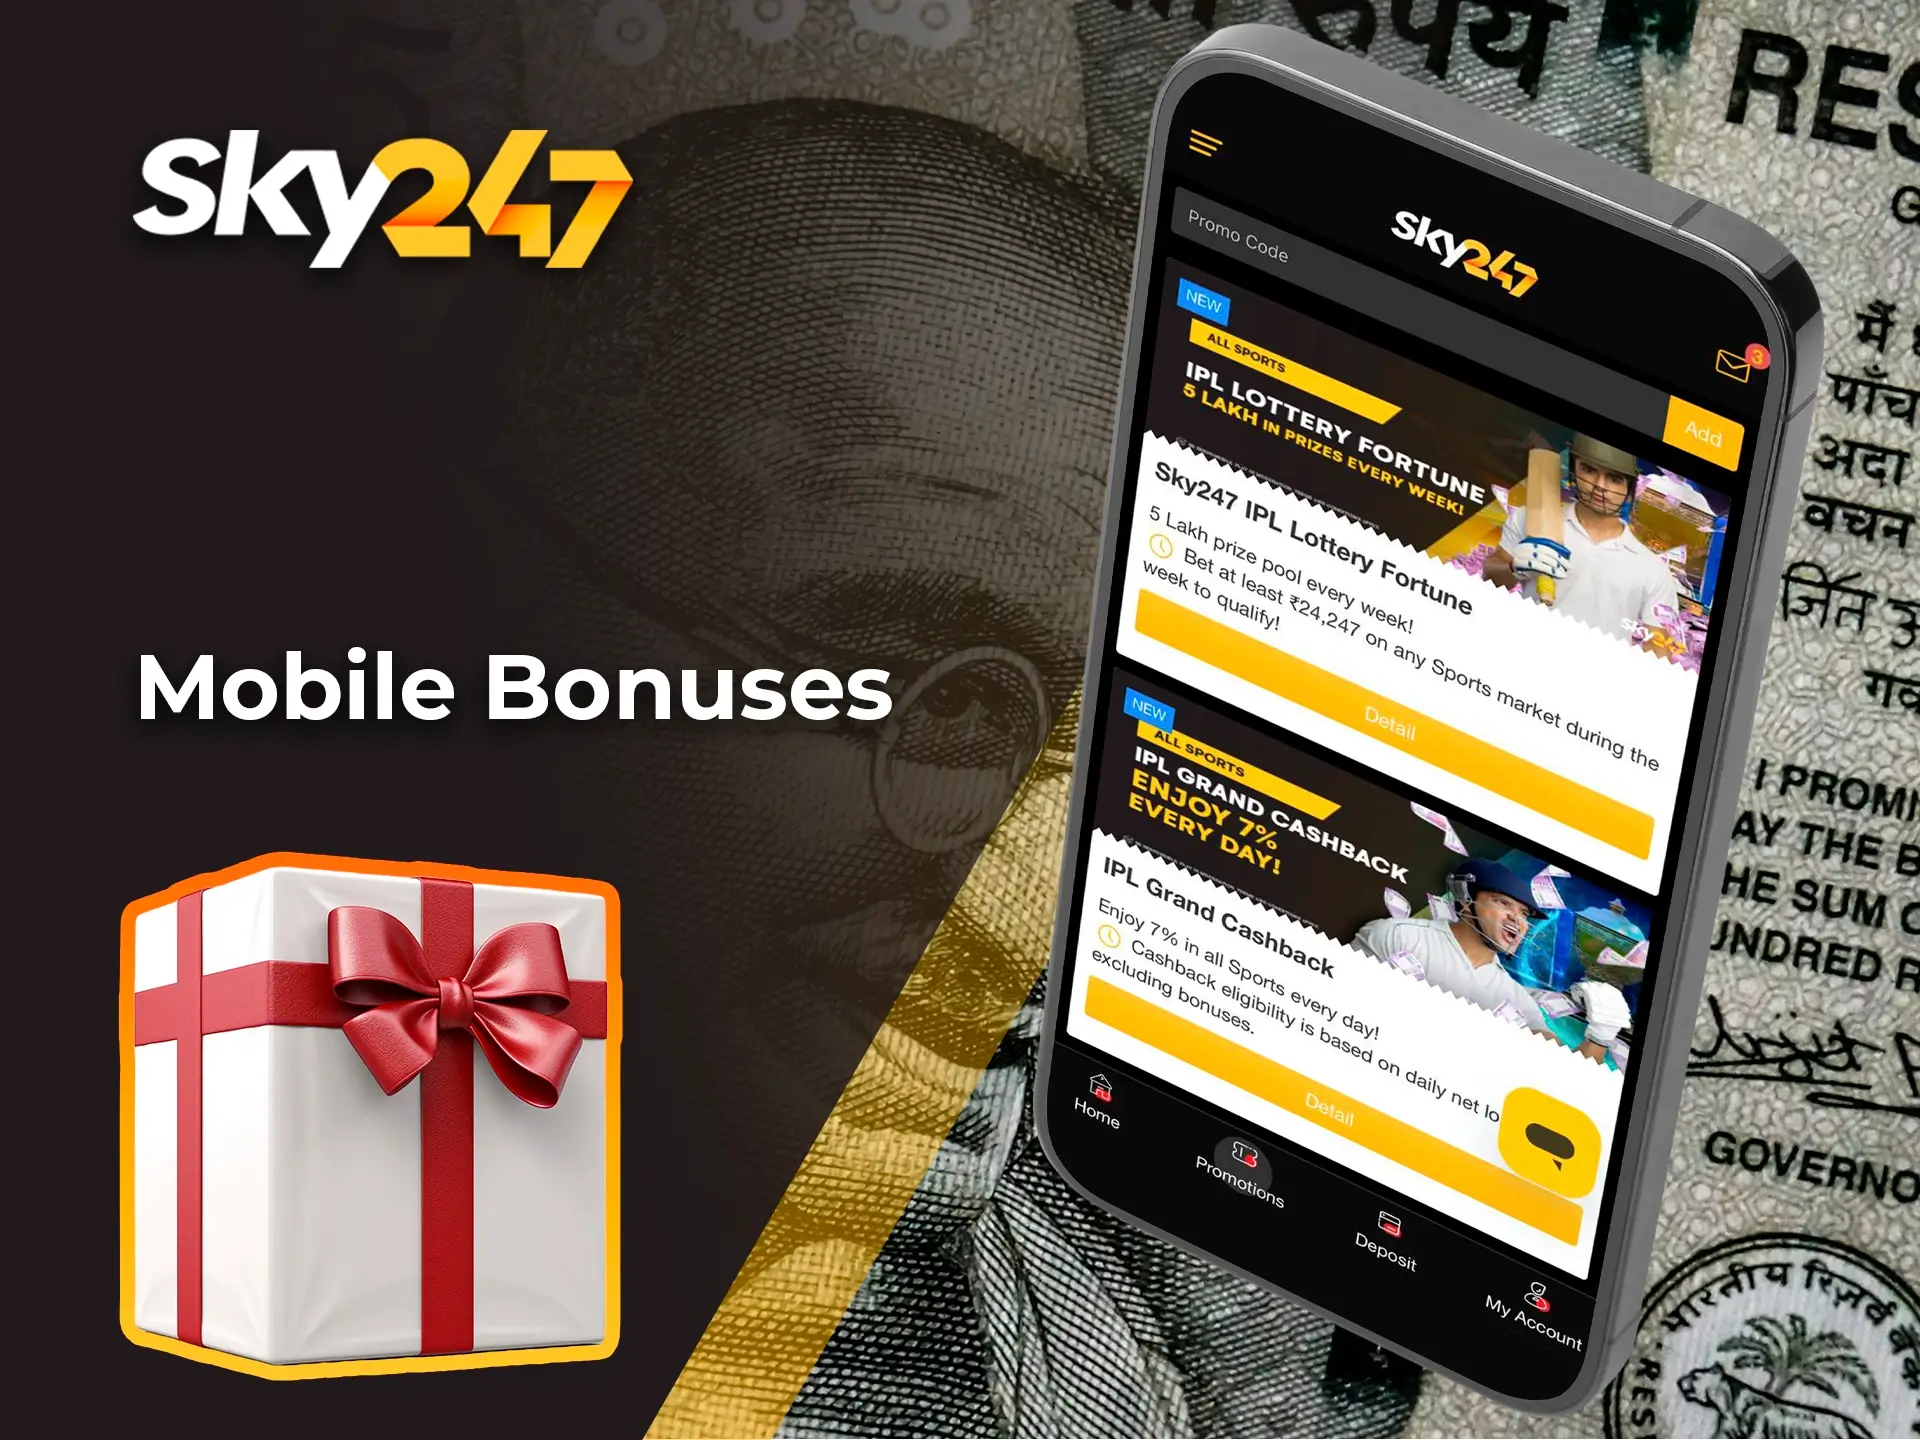 Take advantage of promotions and bonuses on the Sky247 app to ensure big deposits and wins.